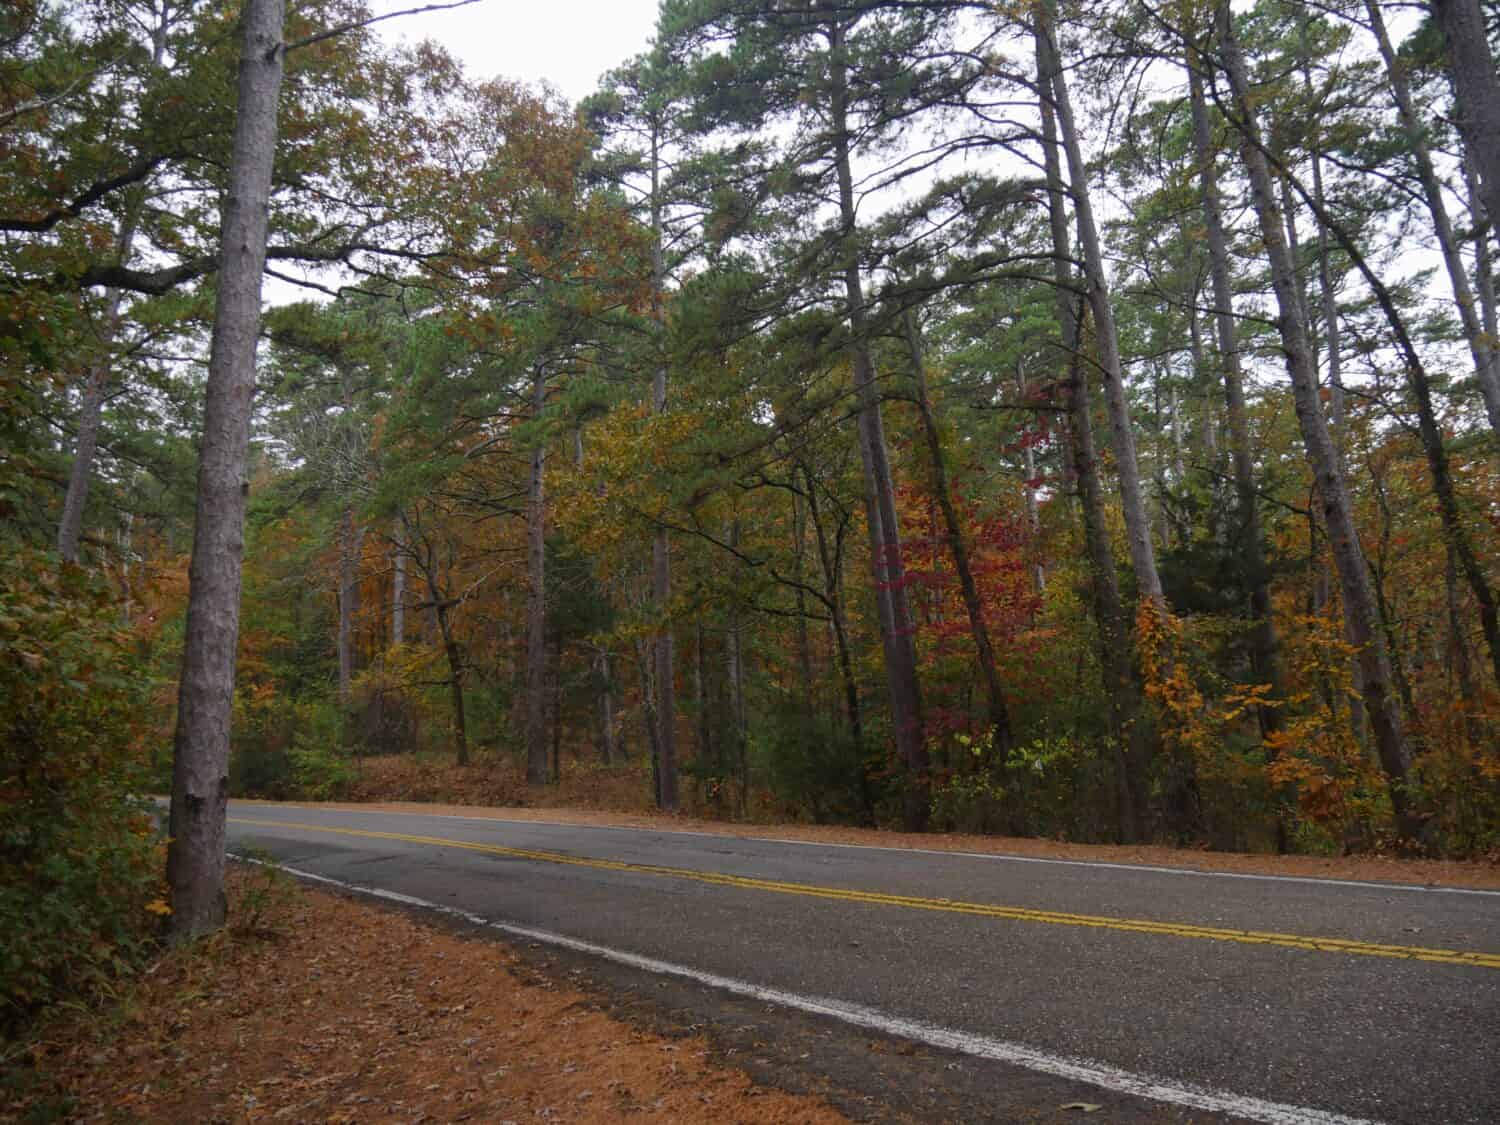 Colorful scenery at the Talimena scenic drive, one of the most popular attractions in Oklahoma at the LeFlore County during autumn season.